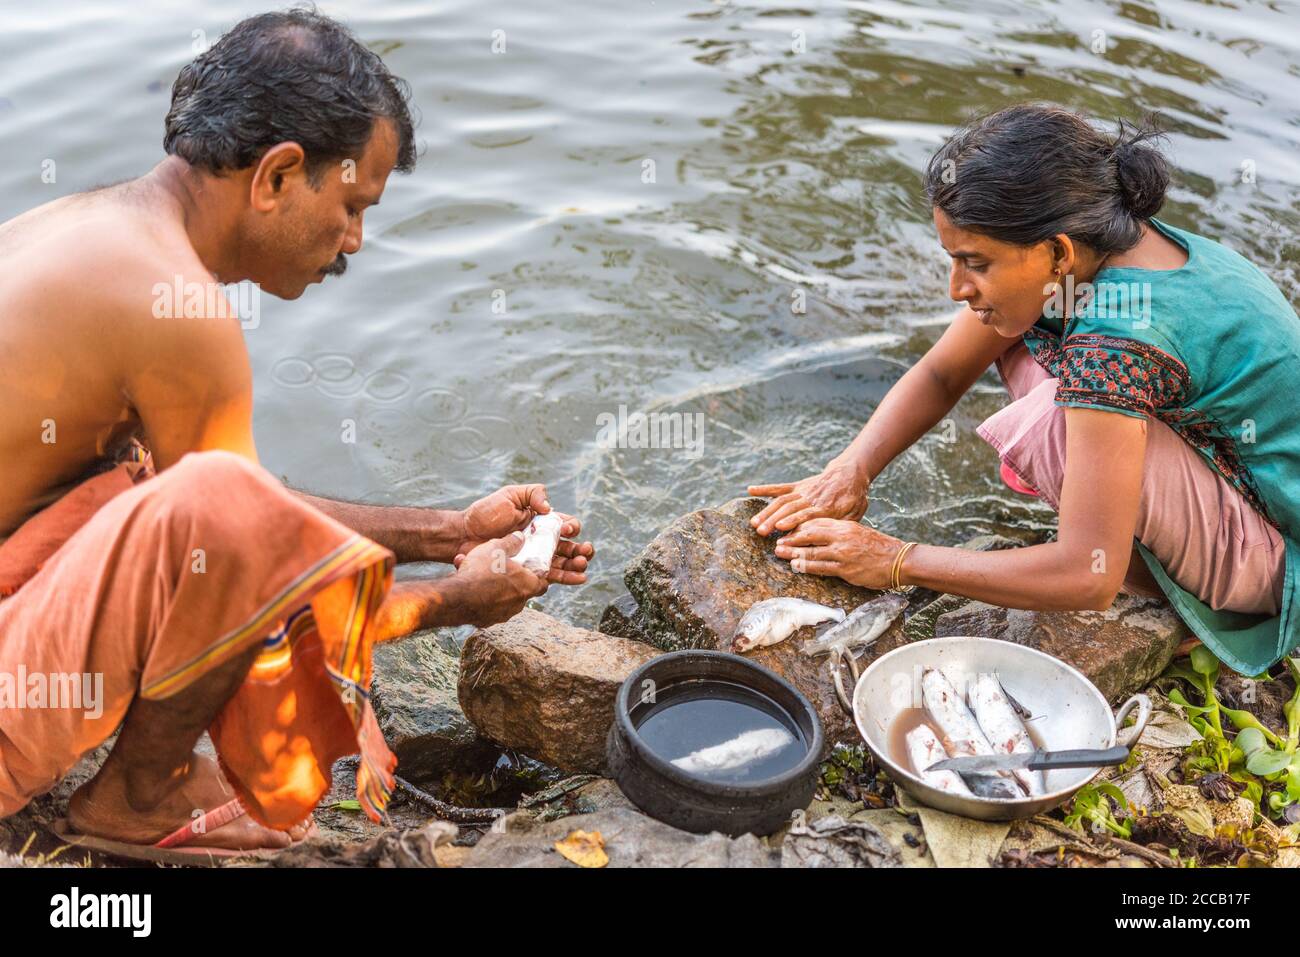 Alappuzha, Kerala, India - December 23, 2015: Keralan man and woman clean fish on the shore of the Pamba River (a part of the Backwaters). Stock Photo